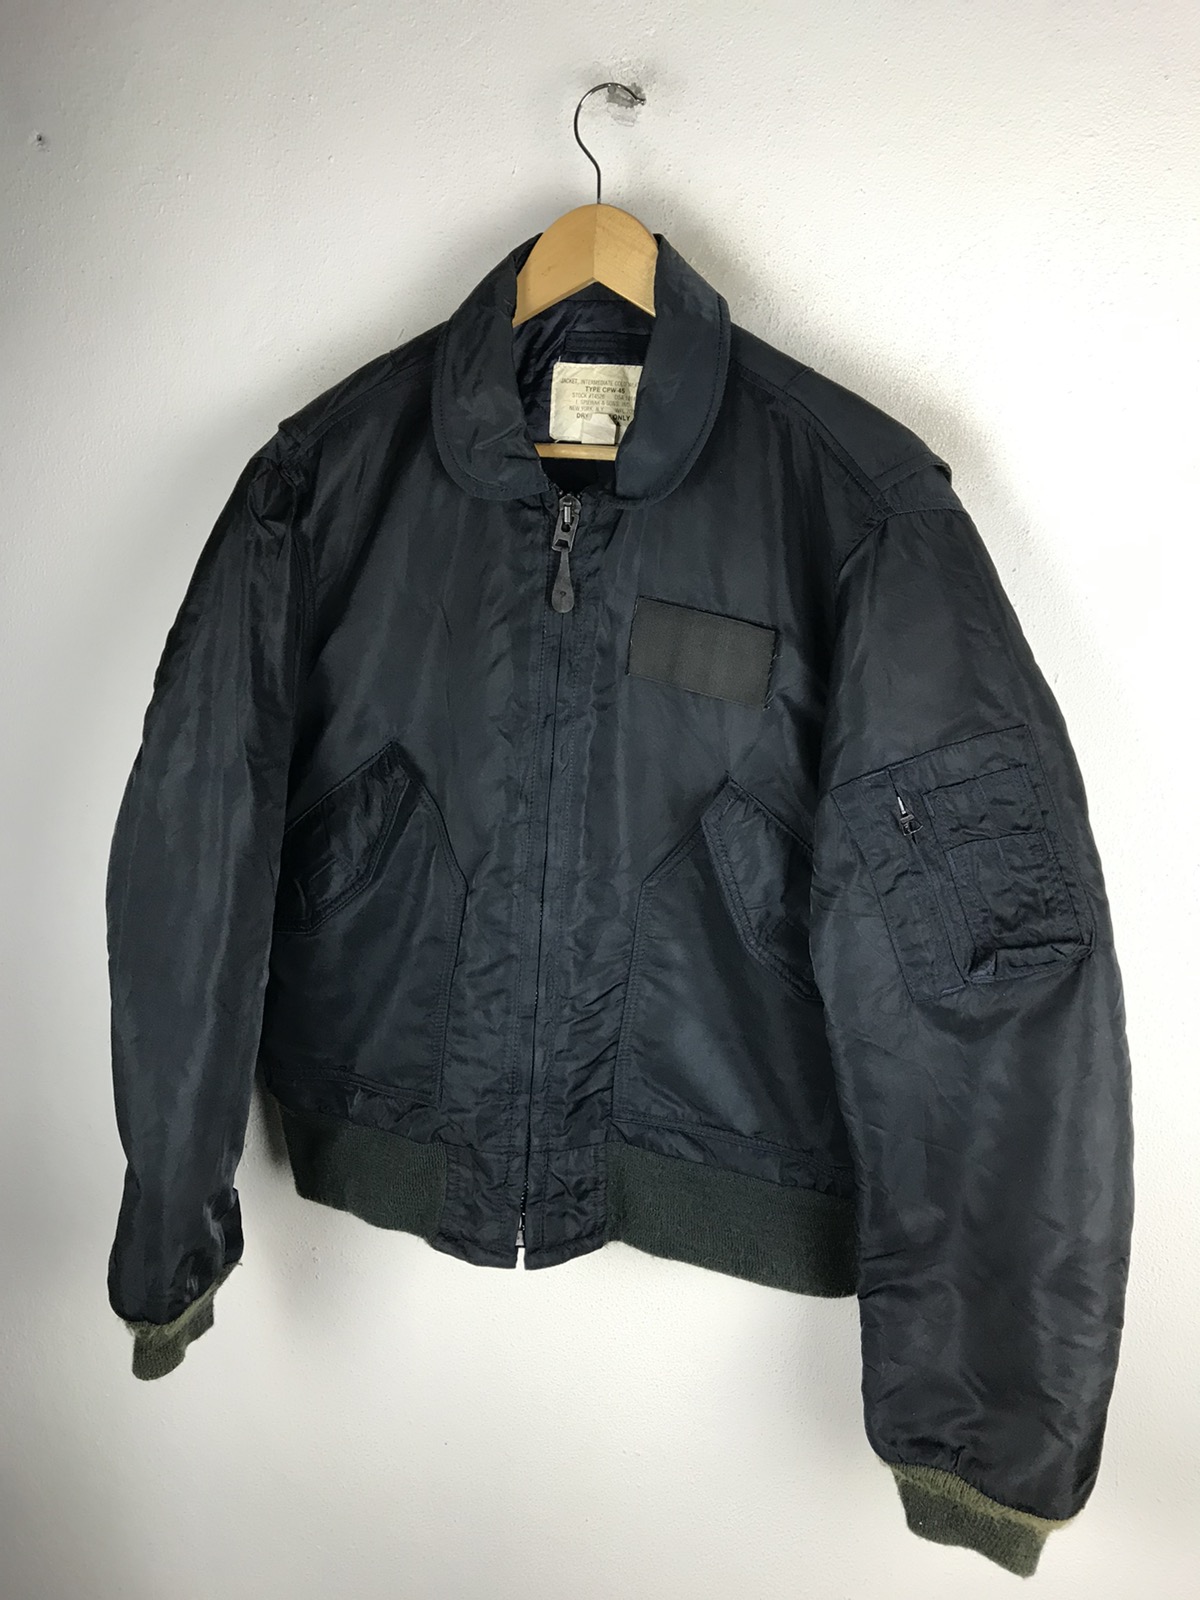 Military - I. SPIEWAK & SONS TYPE CPW-45 VINTAGE BOMBER JACKET